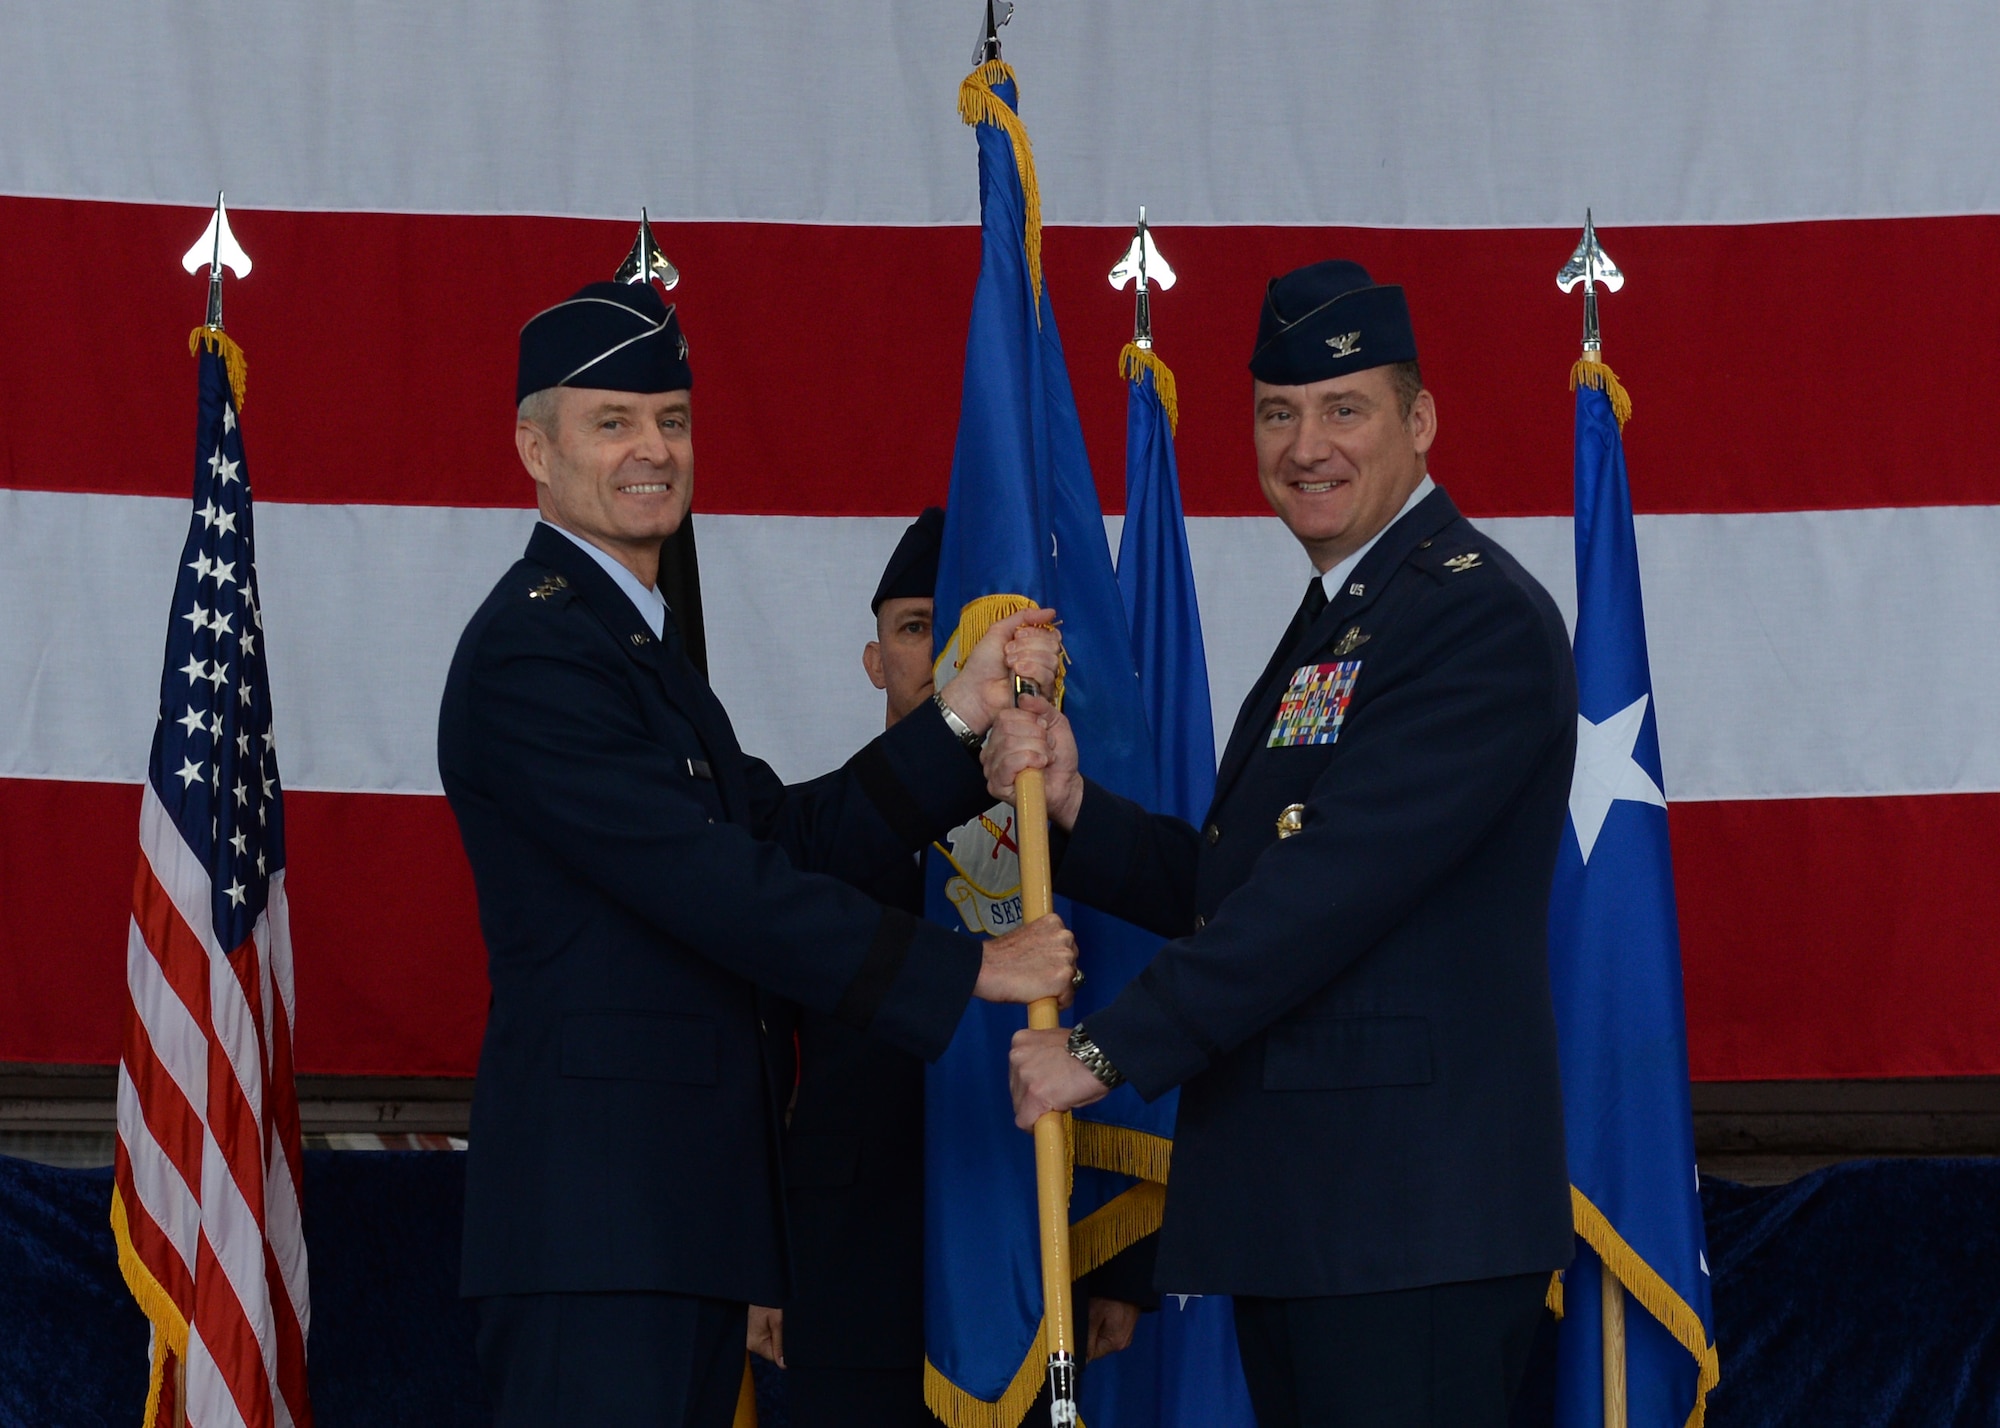 U.S. Air Force Lt. Gen. Darryl Roberson, 3rd Air Force commander, passes the 52nd Fighter Wing guidon to Col. Peter Bilodeau, 52nd Fighter Wing commander, during an assumption of command ceremony July 11, 2014, at Spangdahlem Air Base, Germany. Bilodeau assumed command of five groups, 24 squadrons, 16 geographically separated units spread across five countries with approximately 4,500 active duty military members, 6,000 family members, 250 U.S. civilians, 850 host-nation employees and 300 retirees. (U.S. Air Force photo by Staff Sgt. Daryl Knee/Released)